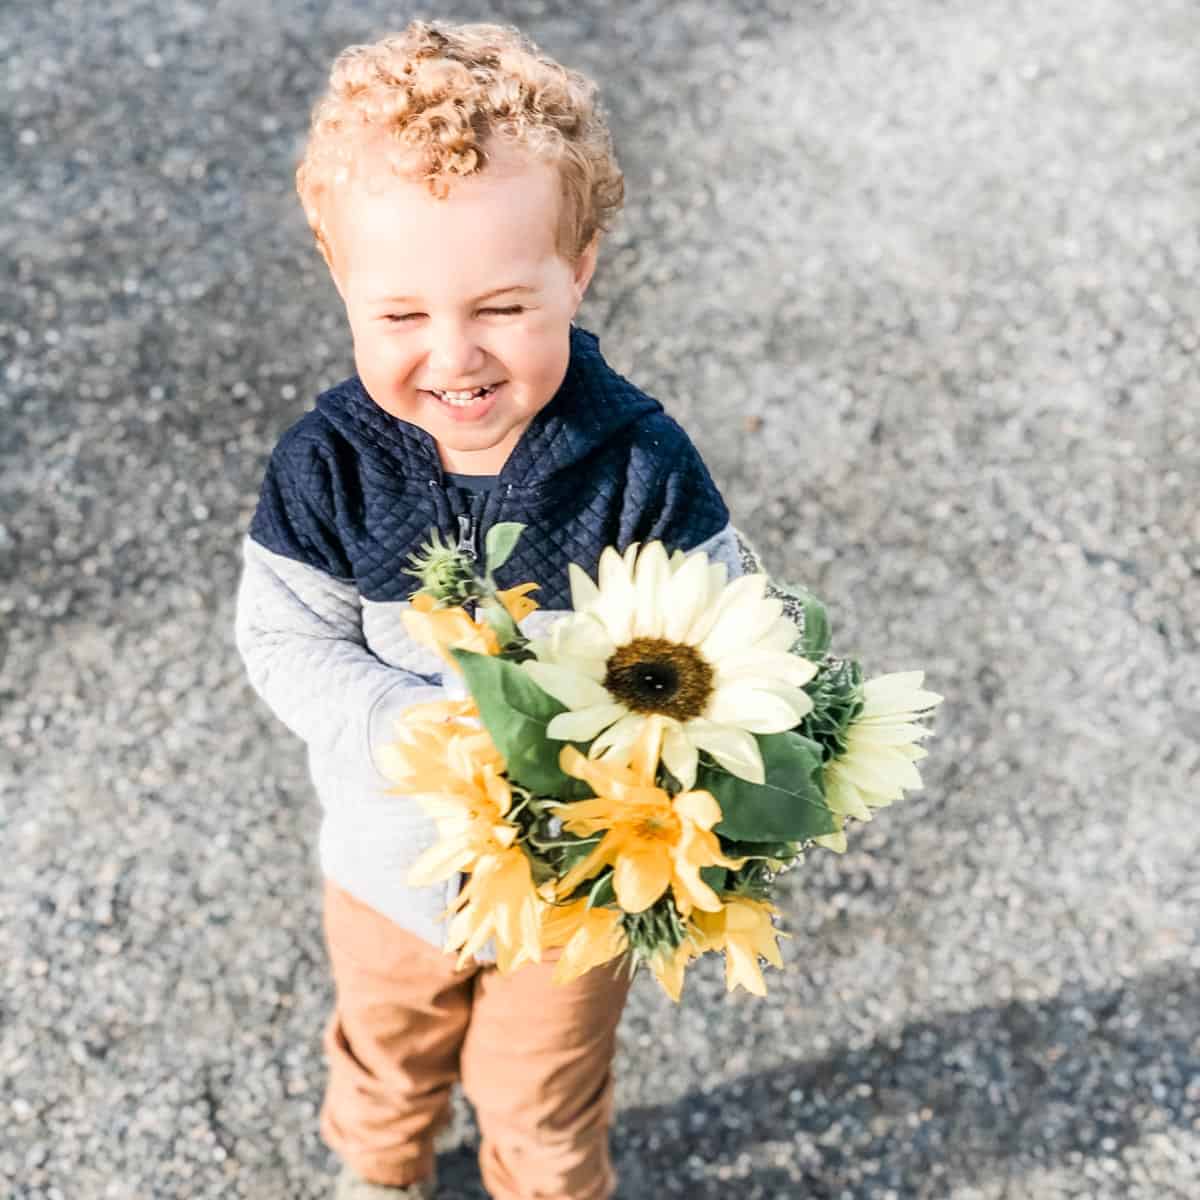 Image showing getting stuff done with toddler William at the markets. William is helping by crying a bunch of sunflowers.